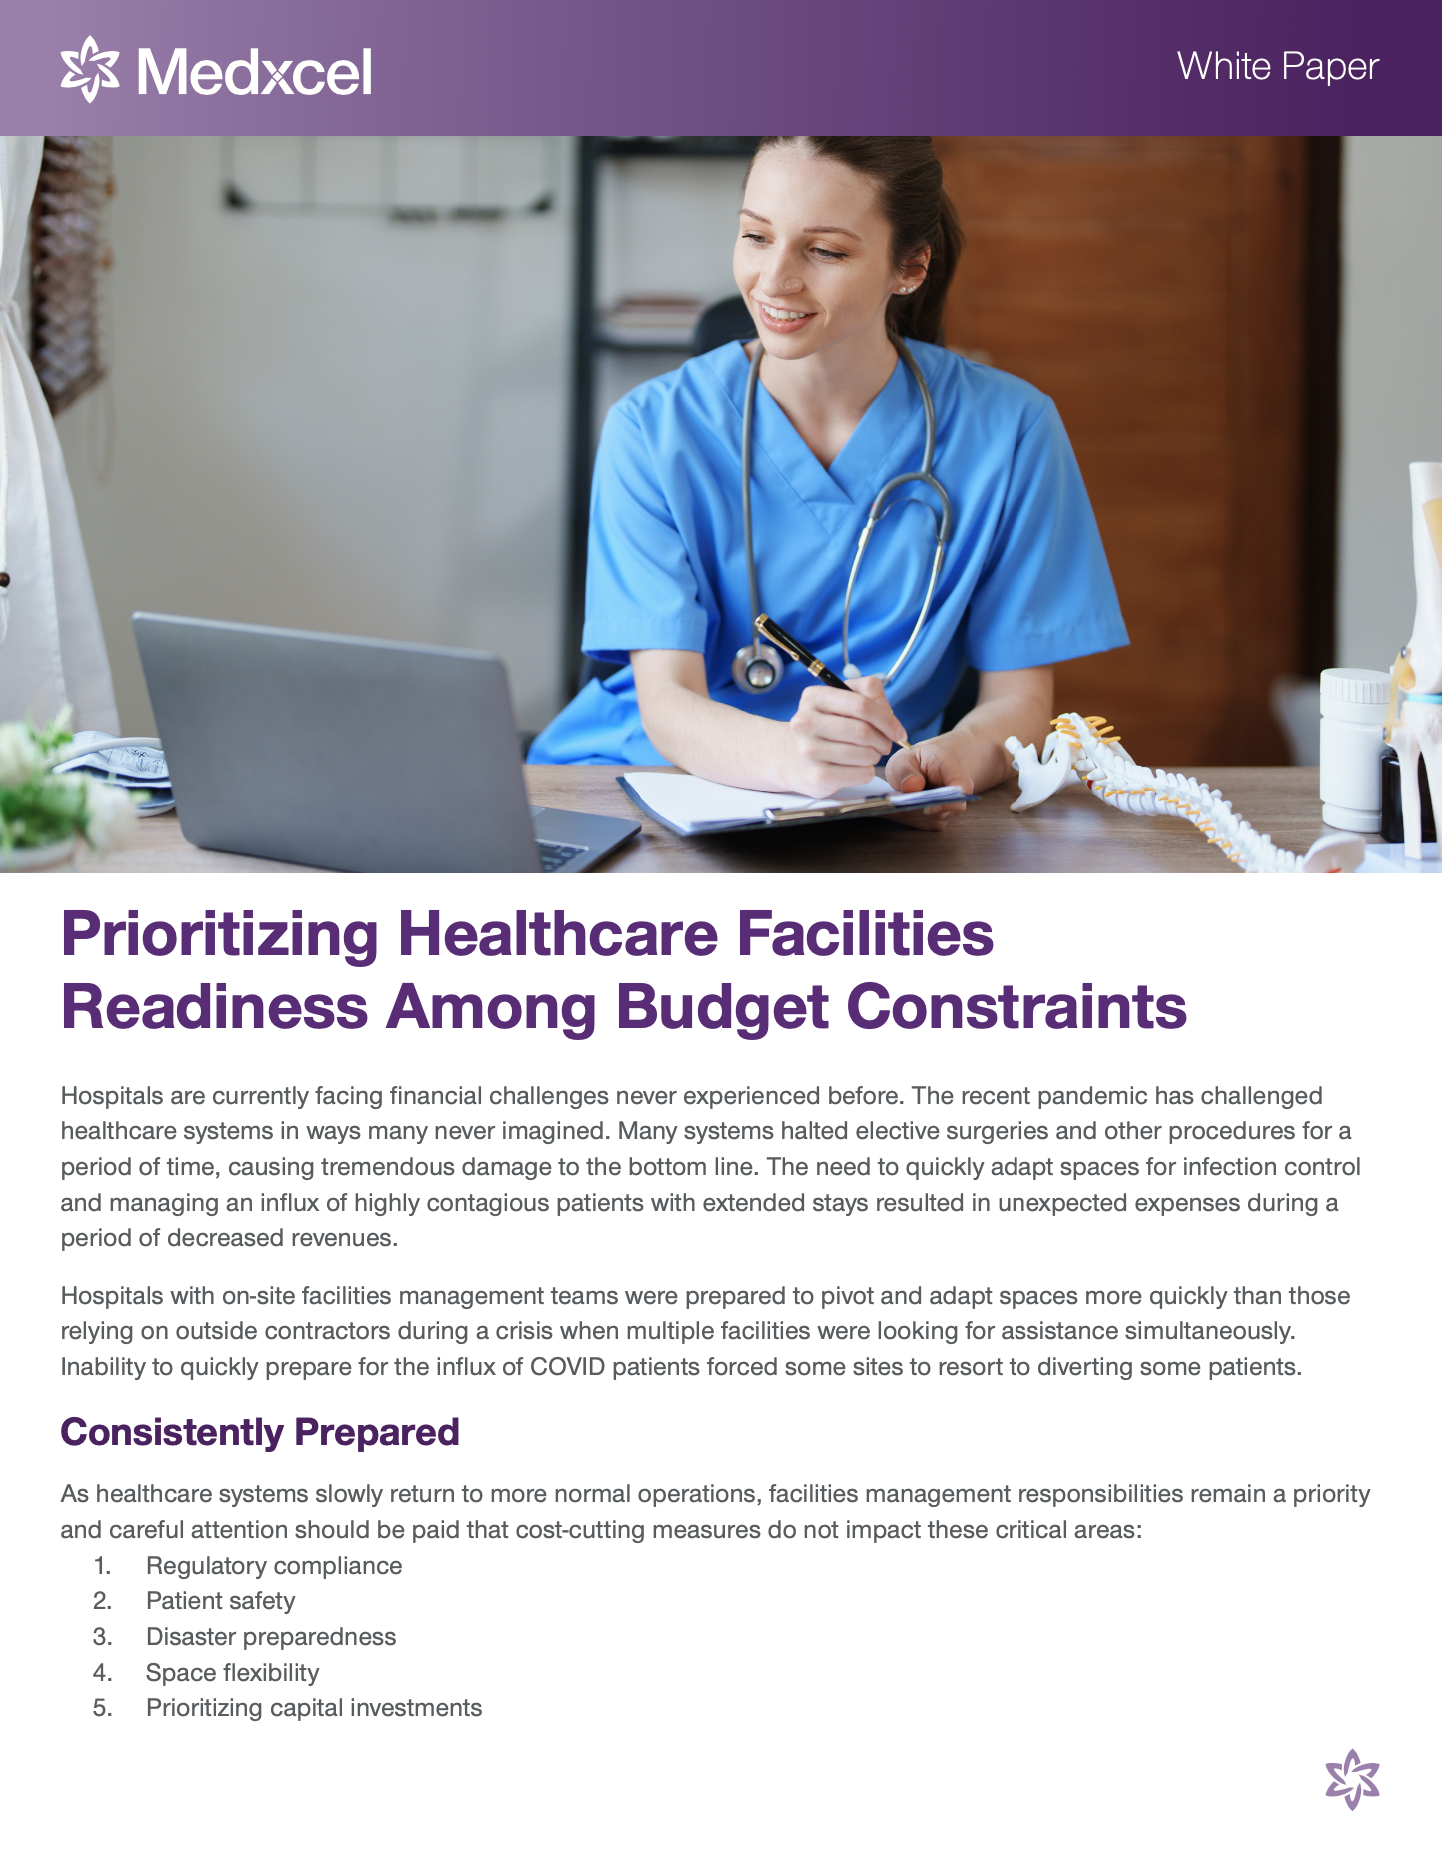 Download Prioritizing Healthcare Facilities Readiness Among Budget Constraints Whitepaper